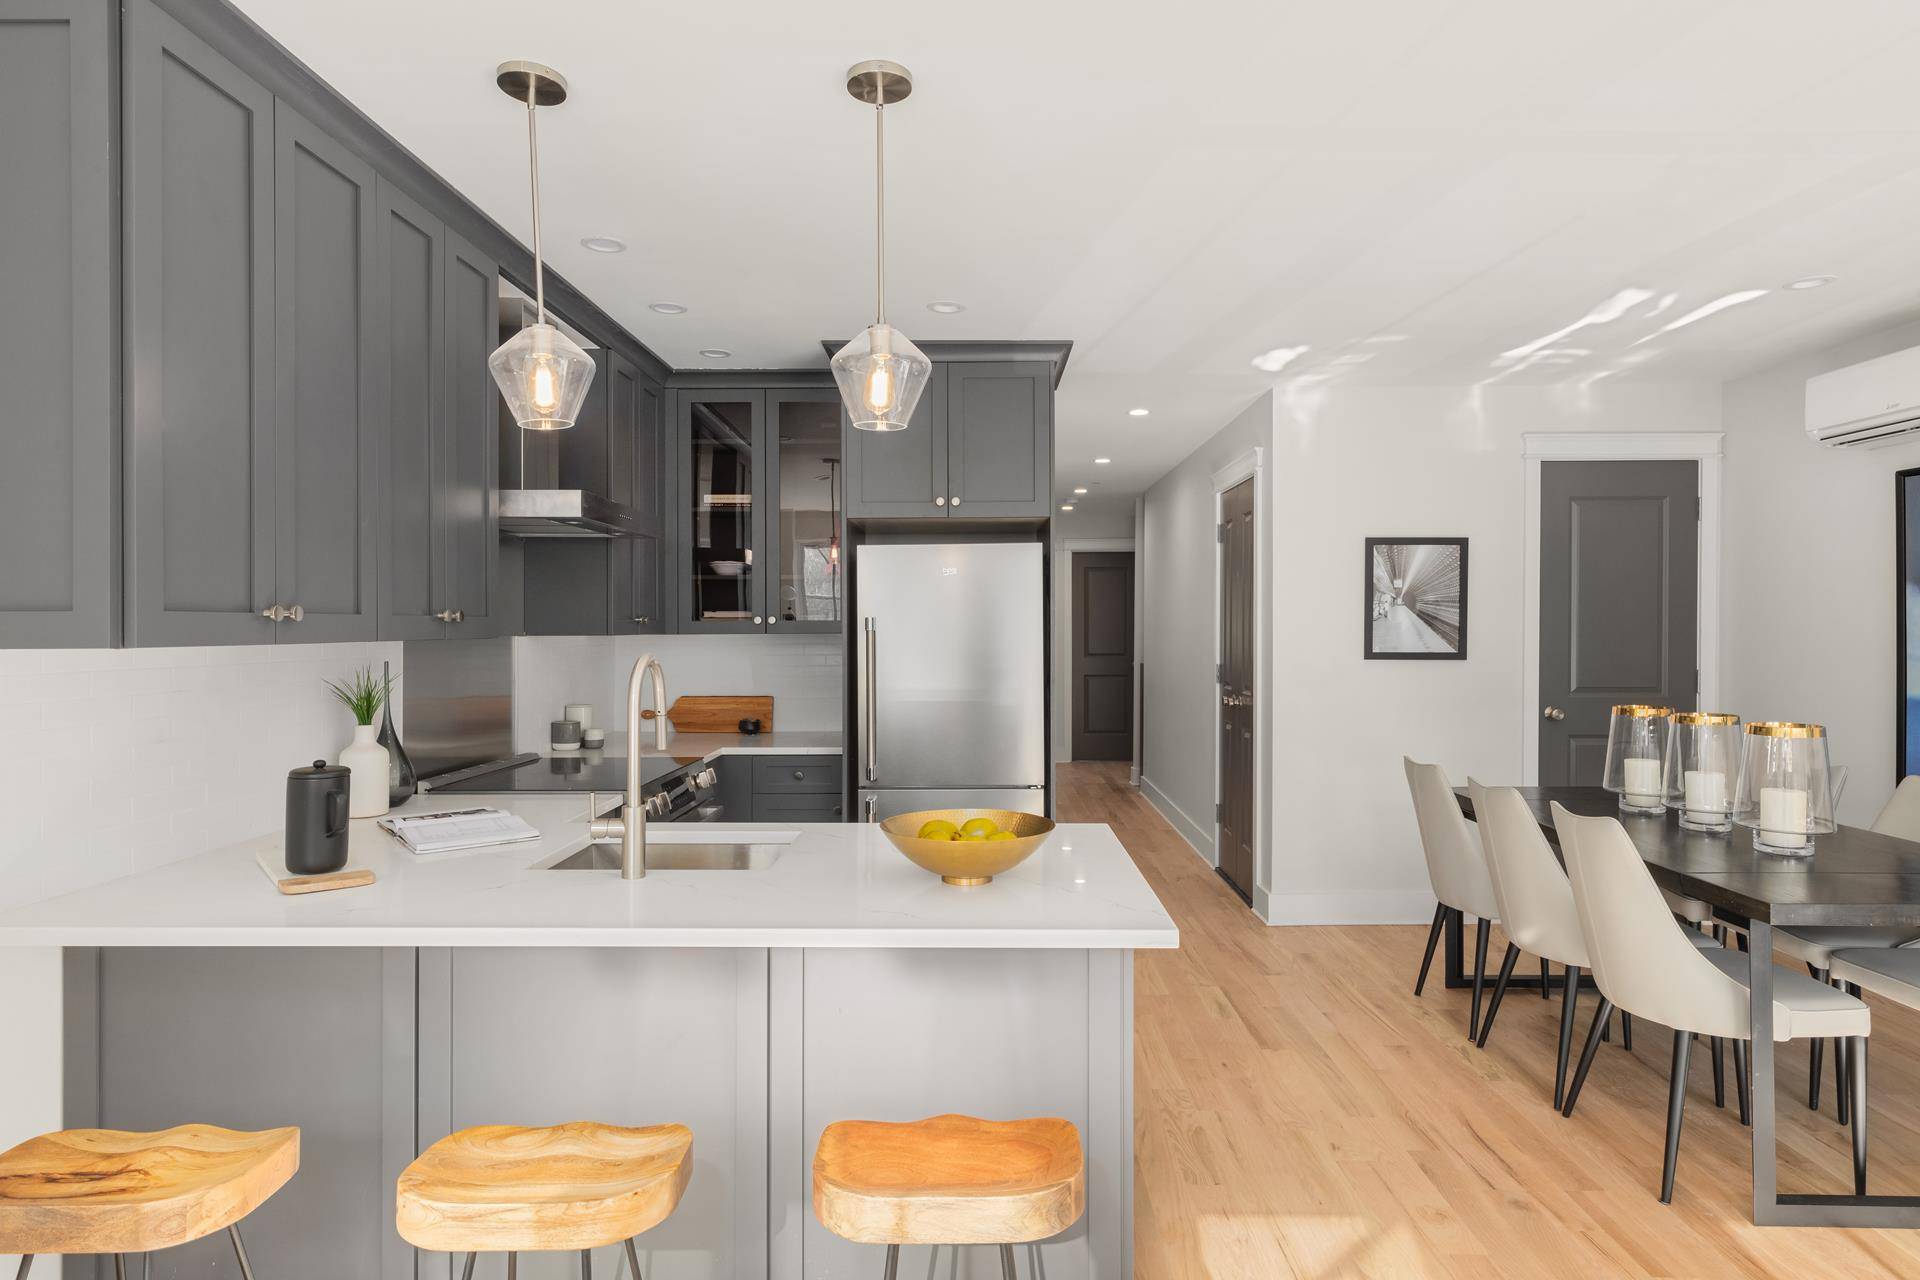 93 Quincy Street, a spectacular new boutique condominium on the hip and historical border of Clinton Hill and Bed Stuy is ready to call home !